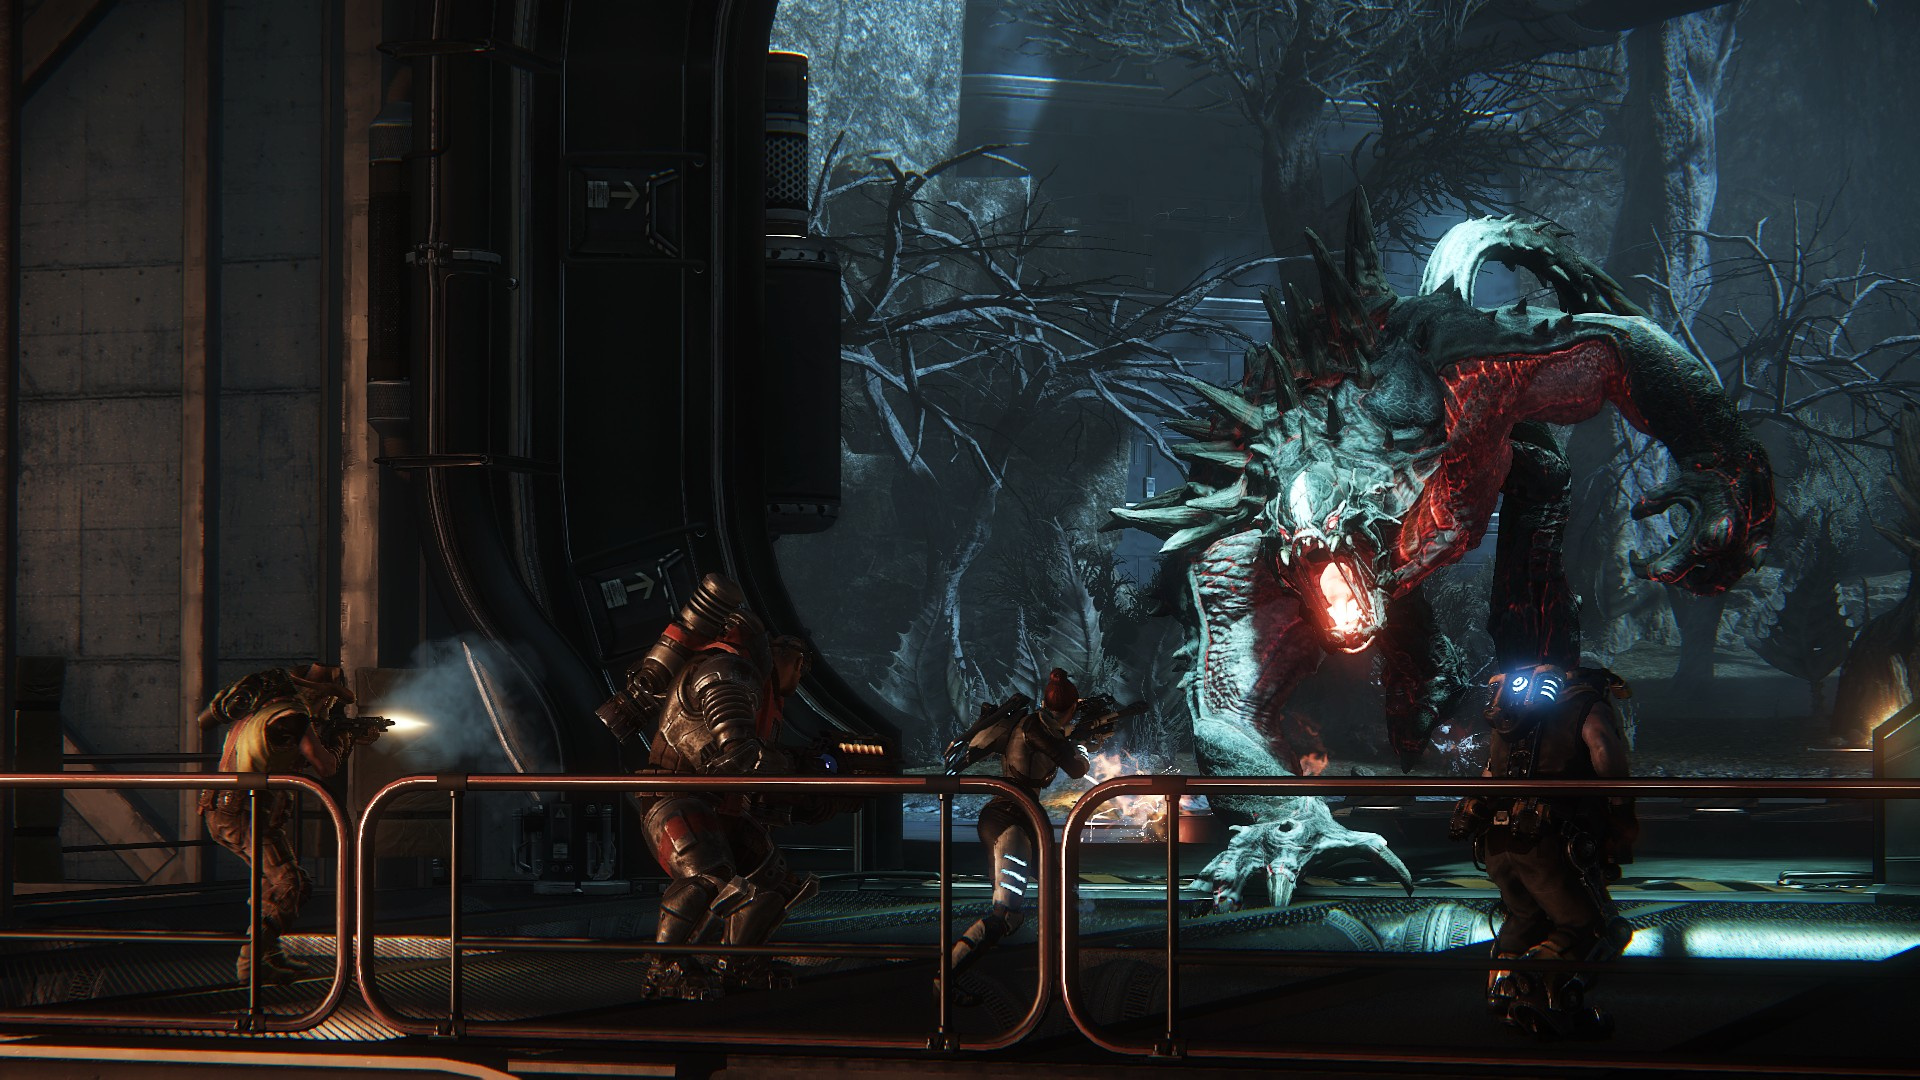 Evolve (PS4 / PlayStation 4) Game Profile News, Reviews